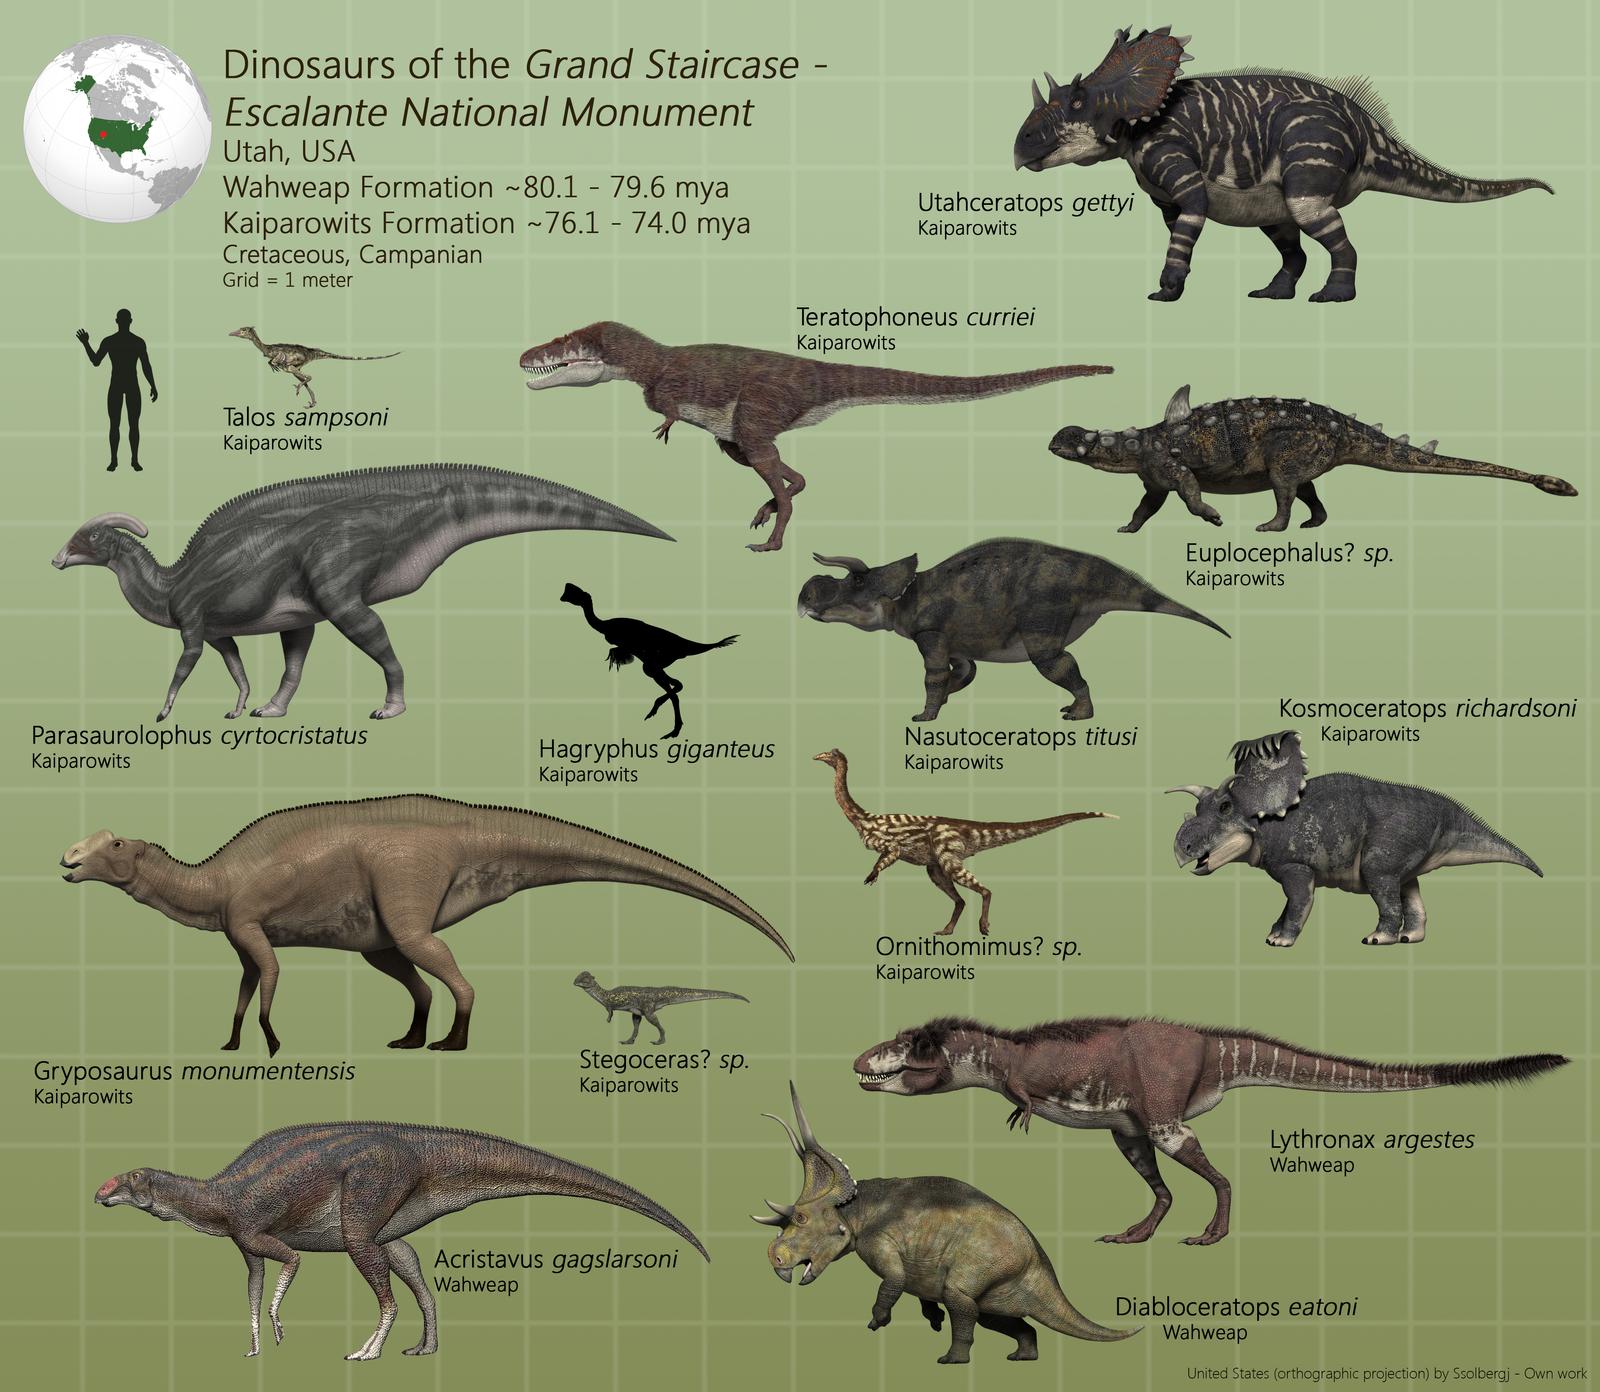 dinosaurs_of_the_grand_staircase___escalante_by_paleoguy_d914b3u-fullview.jpg